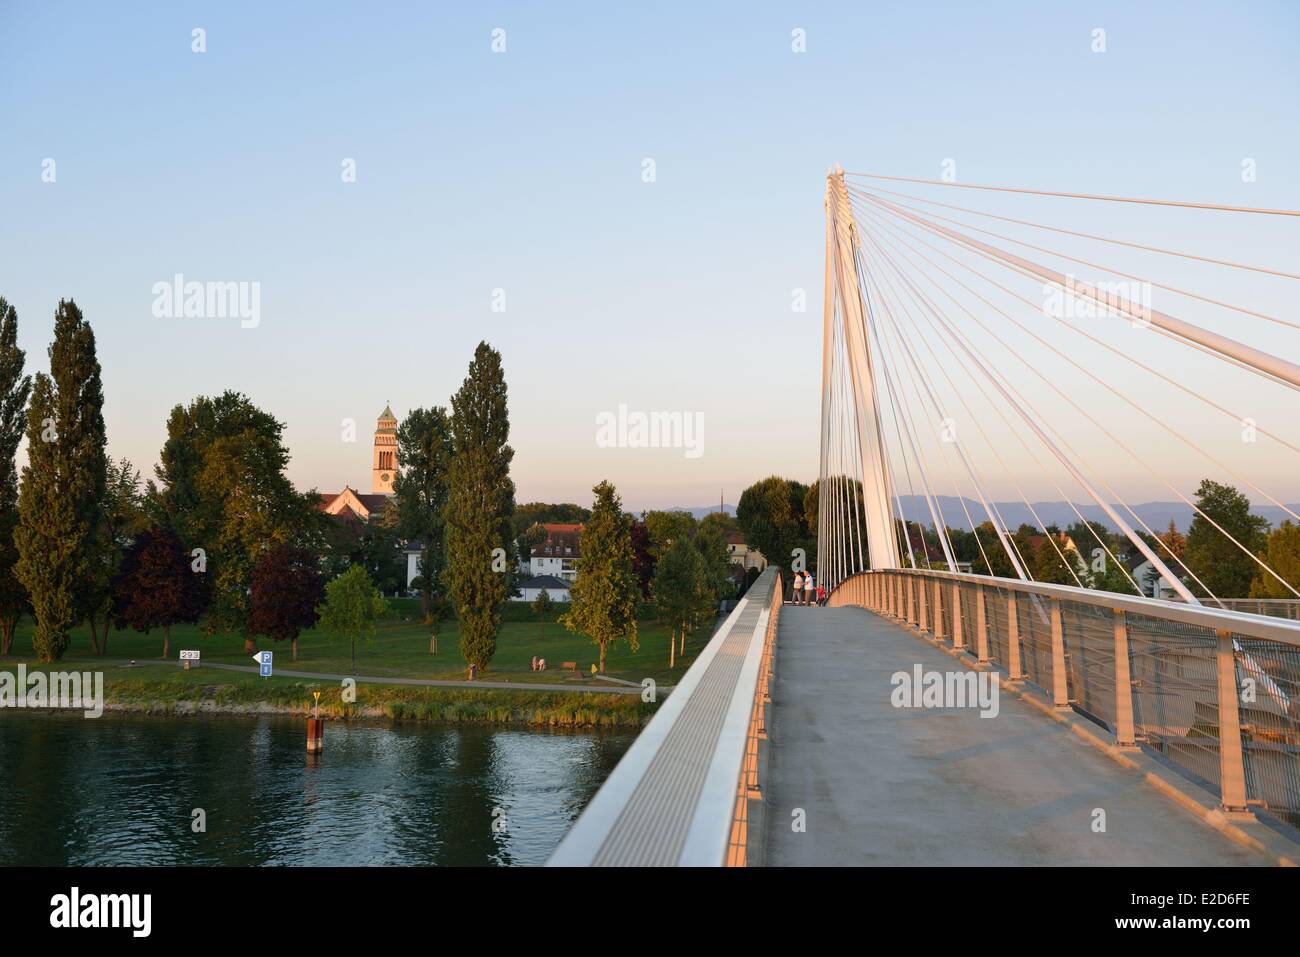 France Bas Rhin between Strasbourg and Kehl in Germany the garden of Two Rivers the Rhine the Mimram bridge connecting the two Stock Photo